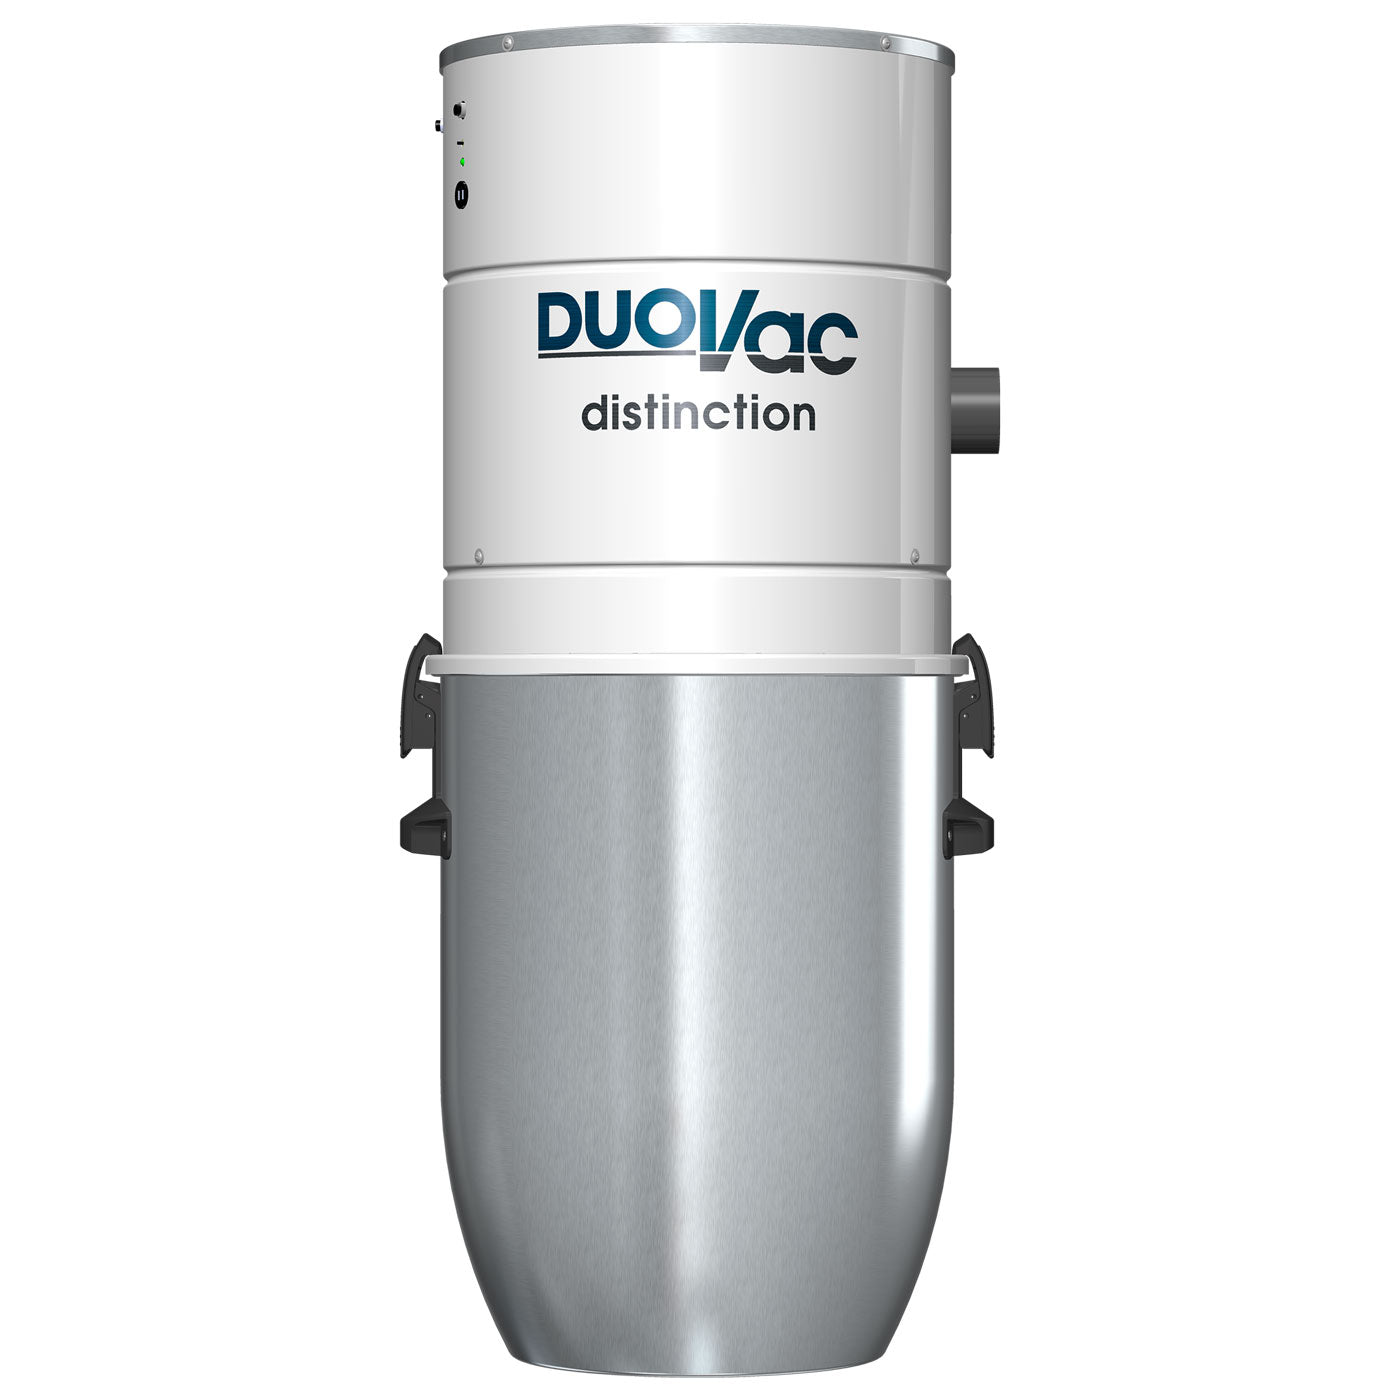 DuoVac Distinction Central Vacuum Canister